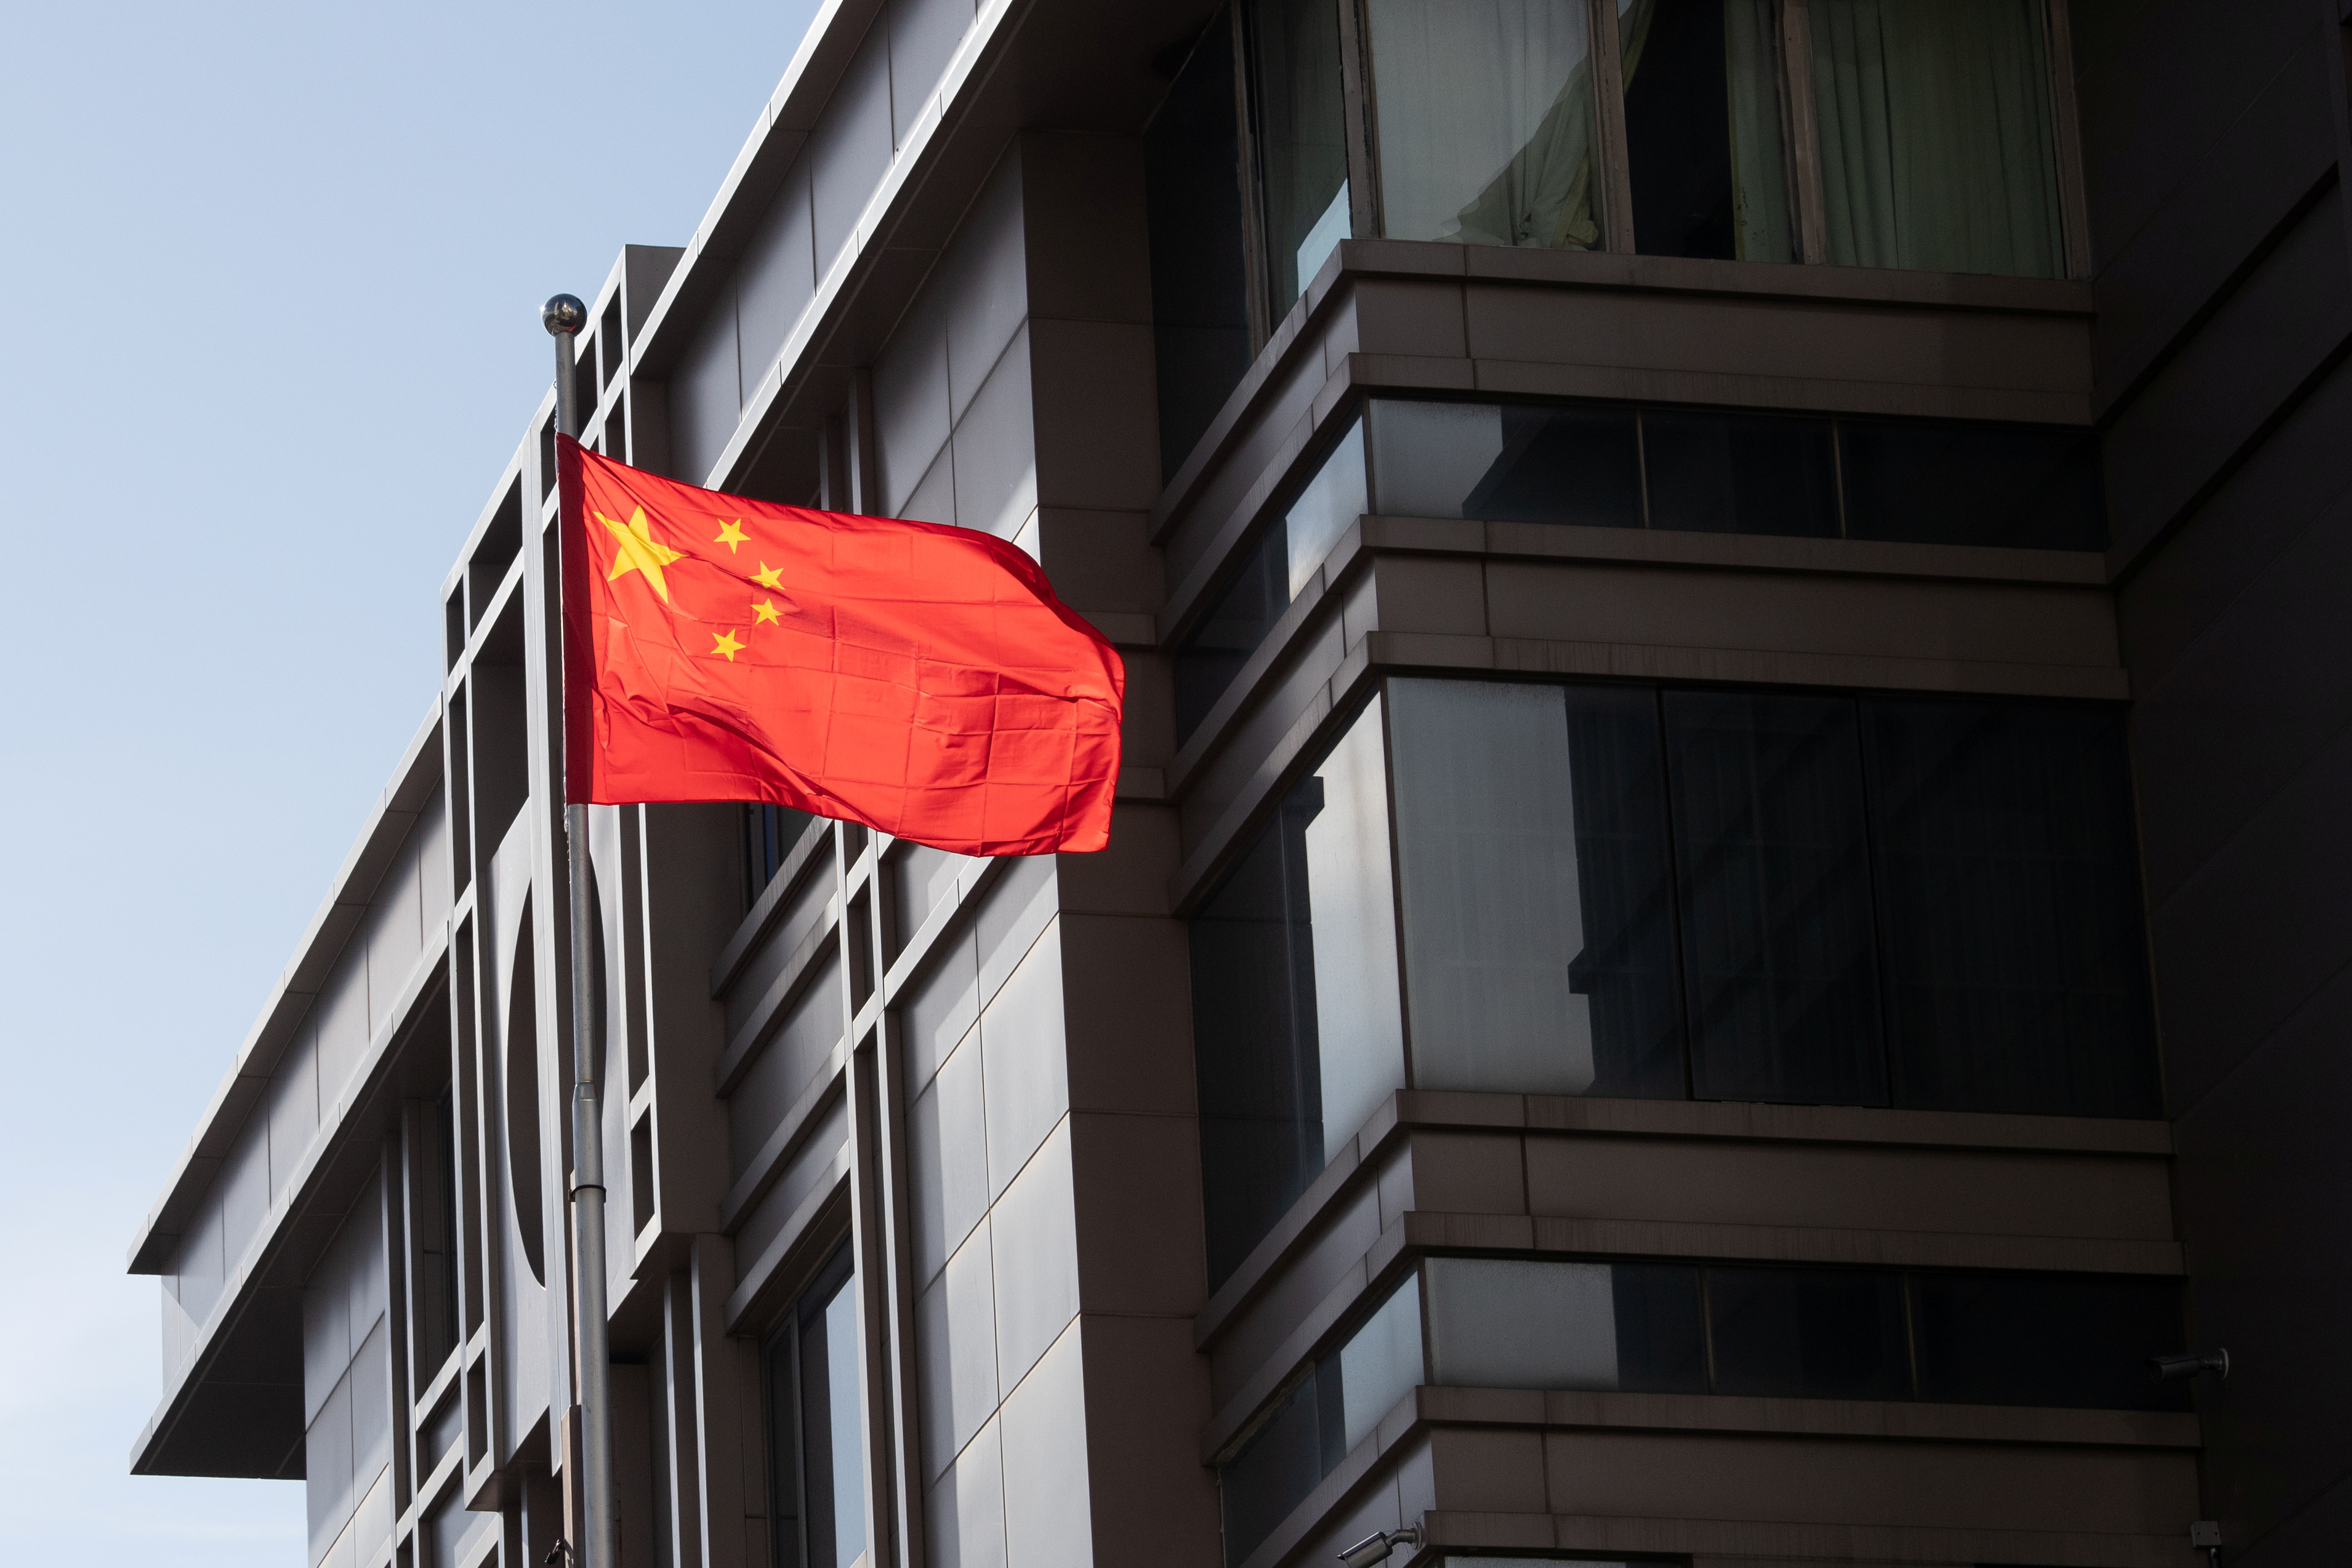 China’s national flag is seen waving at the China Consulate General in Houston, Texas, U.S., July 22, 2020. REUTERS/Adrees Latif